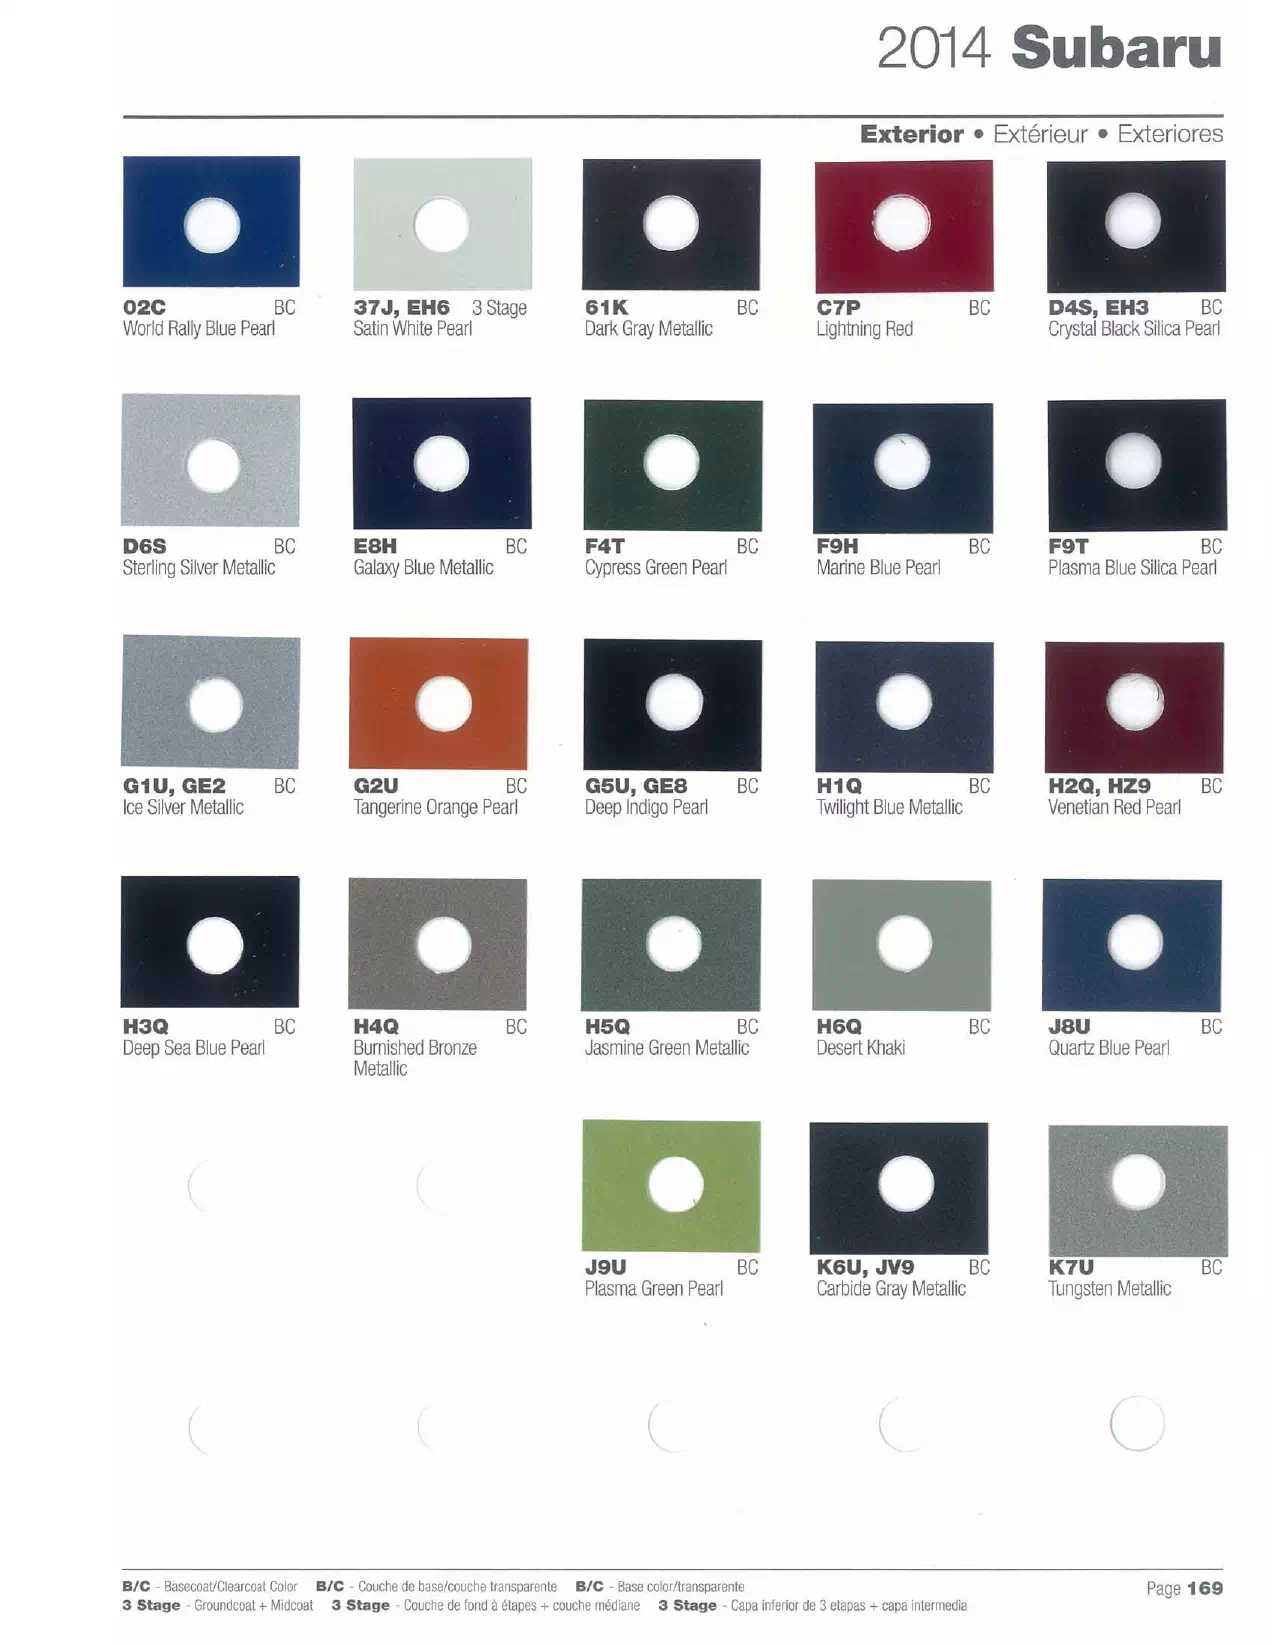 Color Codes and Paint Examples used on 2014 Subaru Vehicles